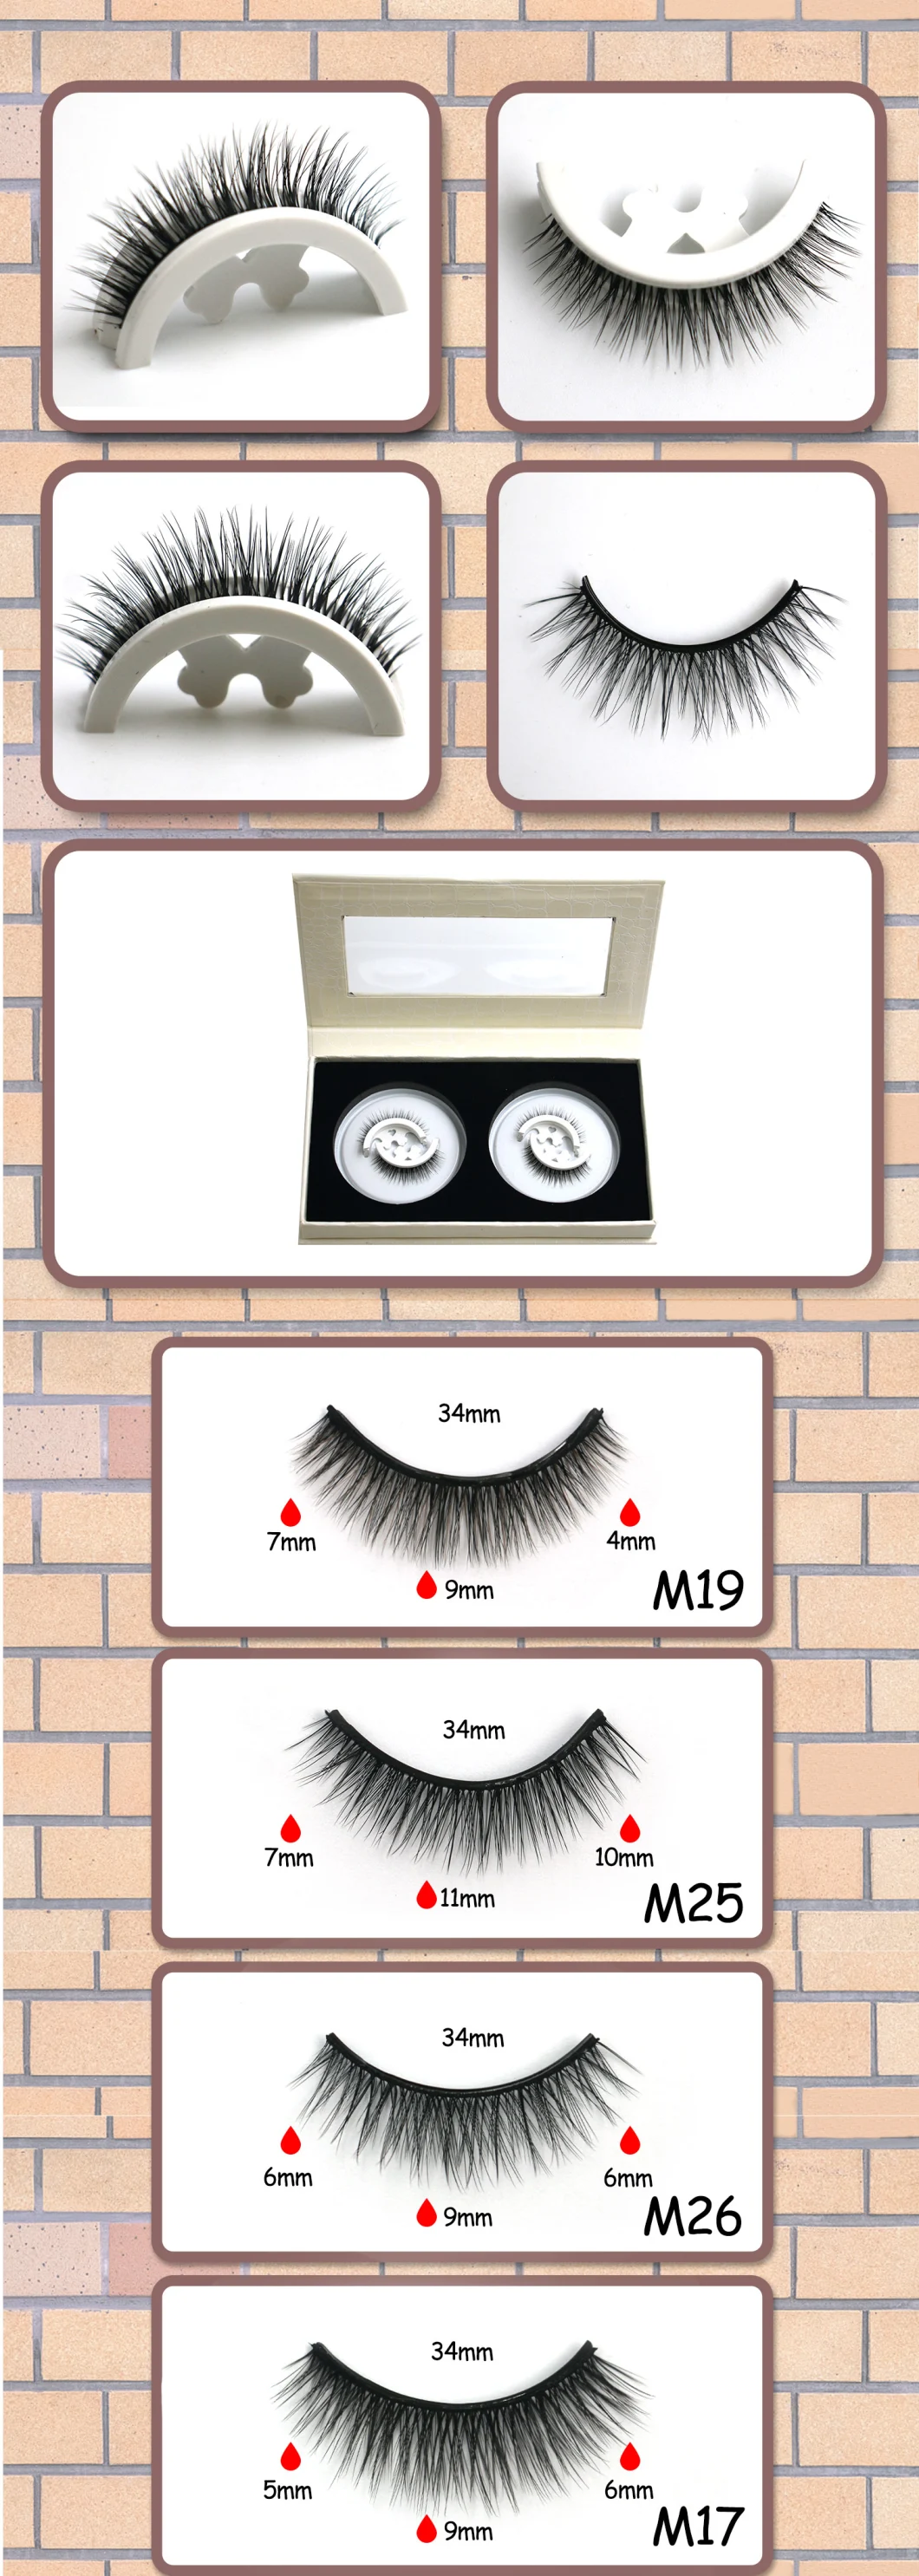 Cruelty Free Full Strip Lashes Adhesive Band Hot Selling Faux Mink Eyelashes Wholesale 5D 3D Adhesive Strip Mink Lashes